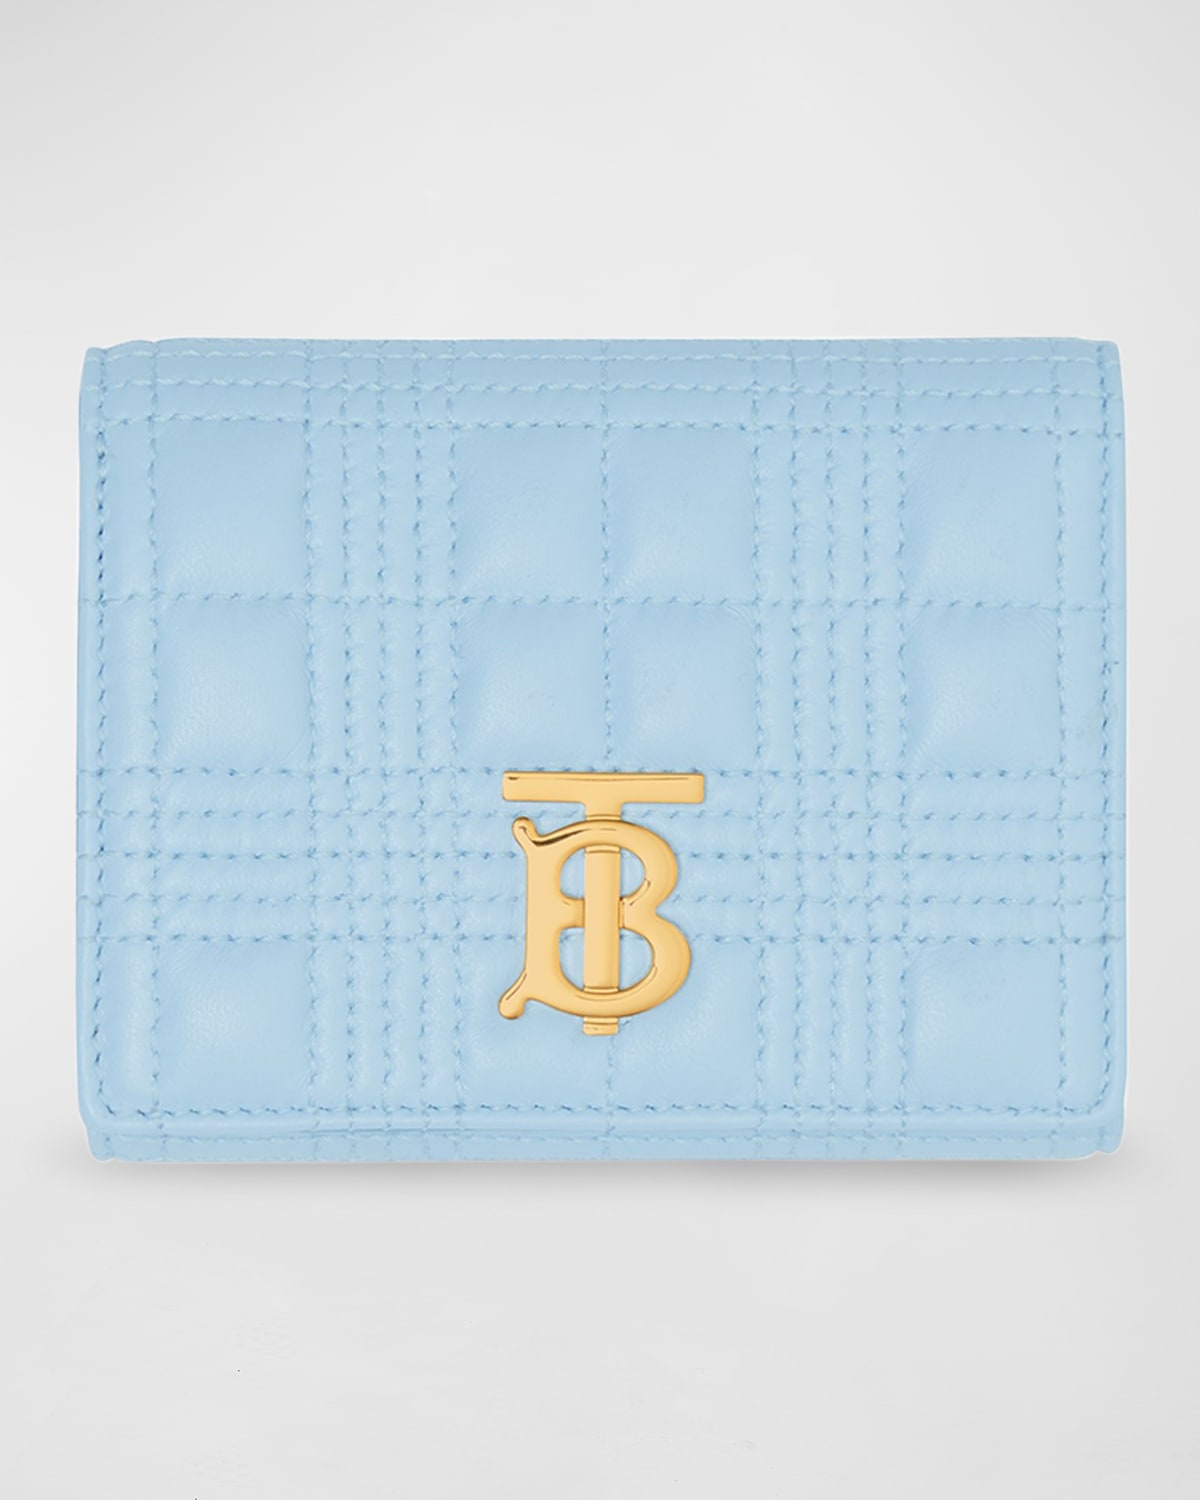 Burberry Lola TB Quilted Leather Compact Wallet